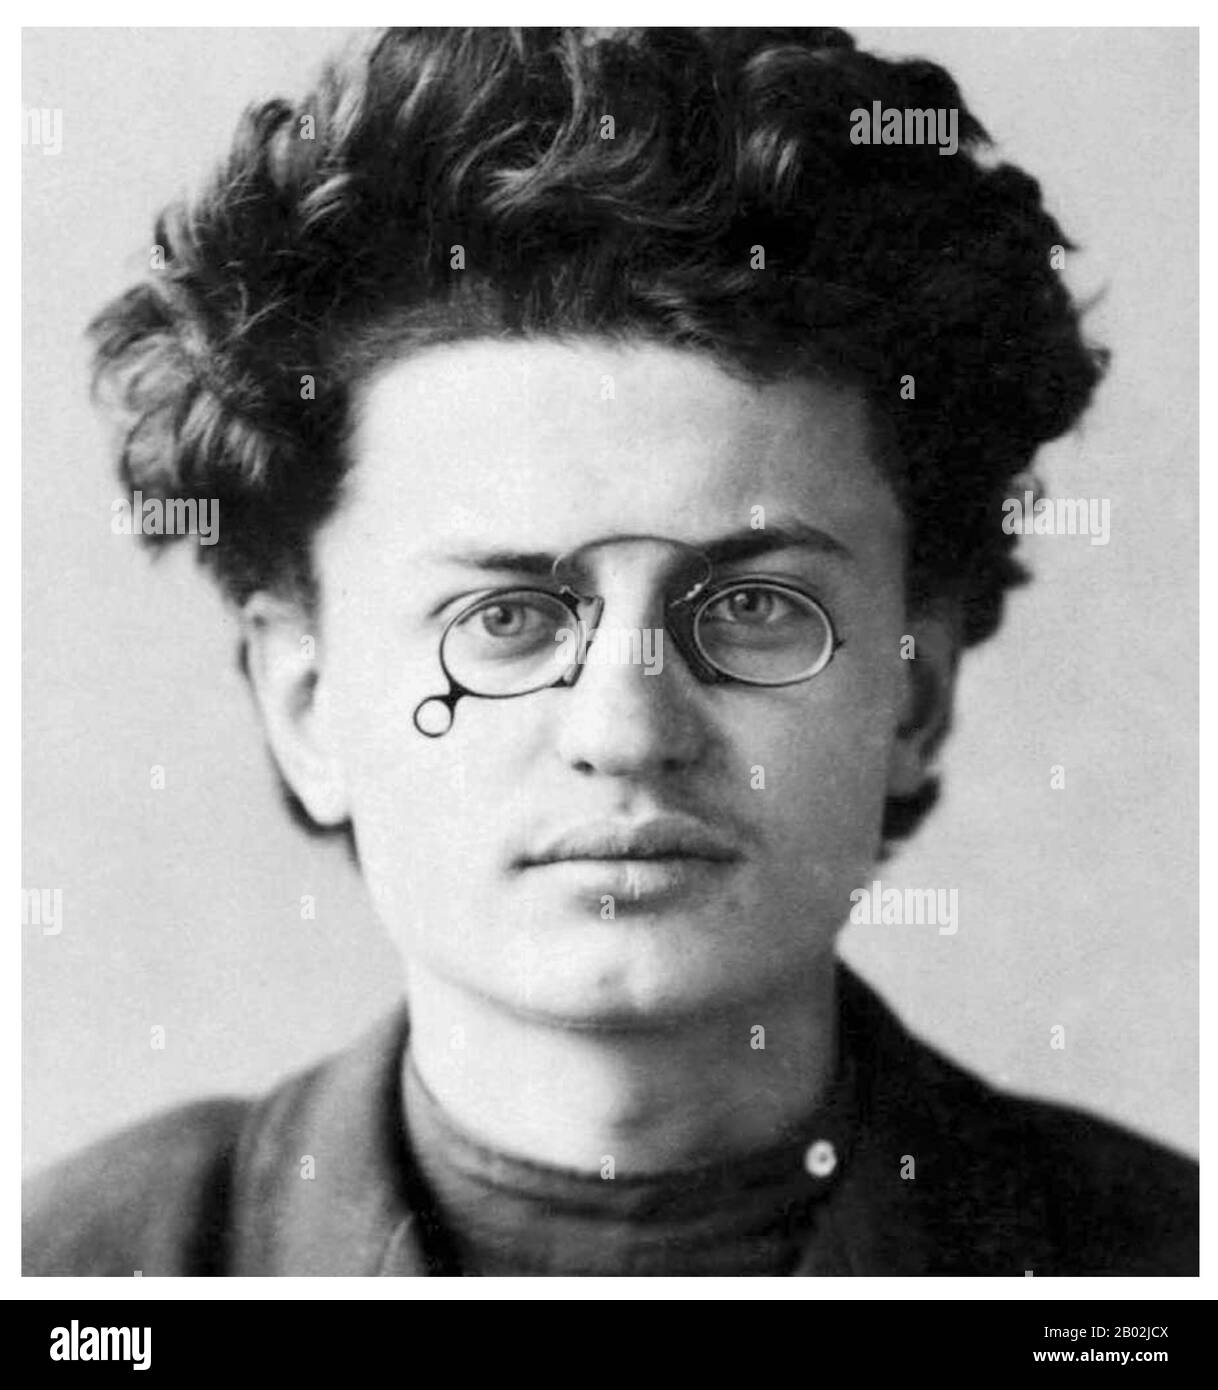 Leon Trotsky (Russian: Лев Дави́дович Тро́цкий; born Lev Davidovich Bronshtein (7 November 1879 – 21 August 1940) was a Russian Marxist revolutionary and theorist, Soviet politician, and the founder and first leader of the Red Army.  Trotsky was initially a supporter of the Menshevik Internationalists faction of the Russian Social Democratic Labour Party. He joined the Bolsheviks immediately prior to the 1917 October Revolution, and eventually became a leader within the Party. During the early days of the Soviet Union, he served first as People's Commissar for Foreign Affairs and later as the Stock Photo